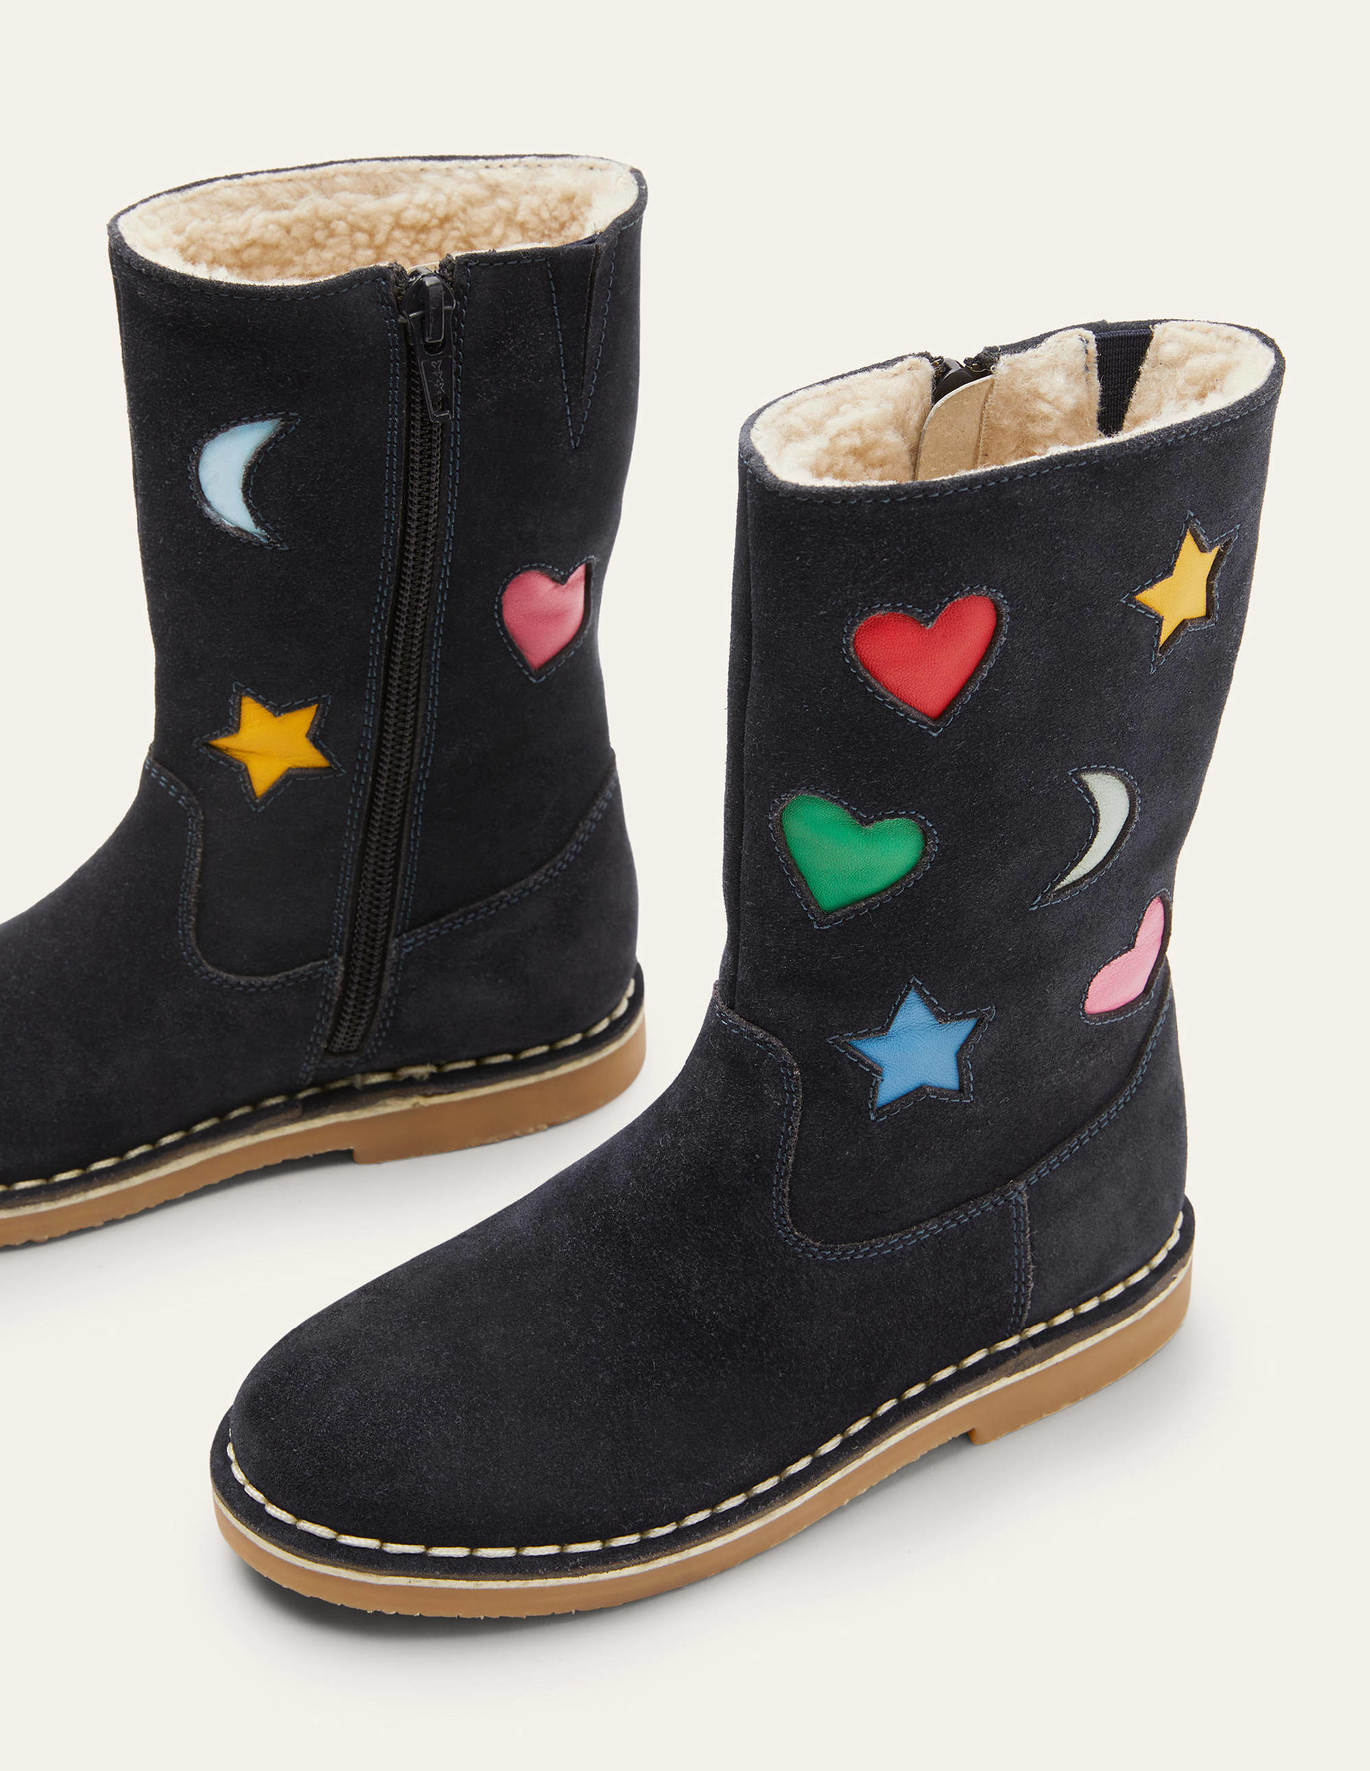 Boden Tall Boots - Navy Suede Rainbow